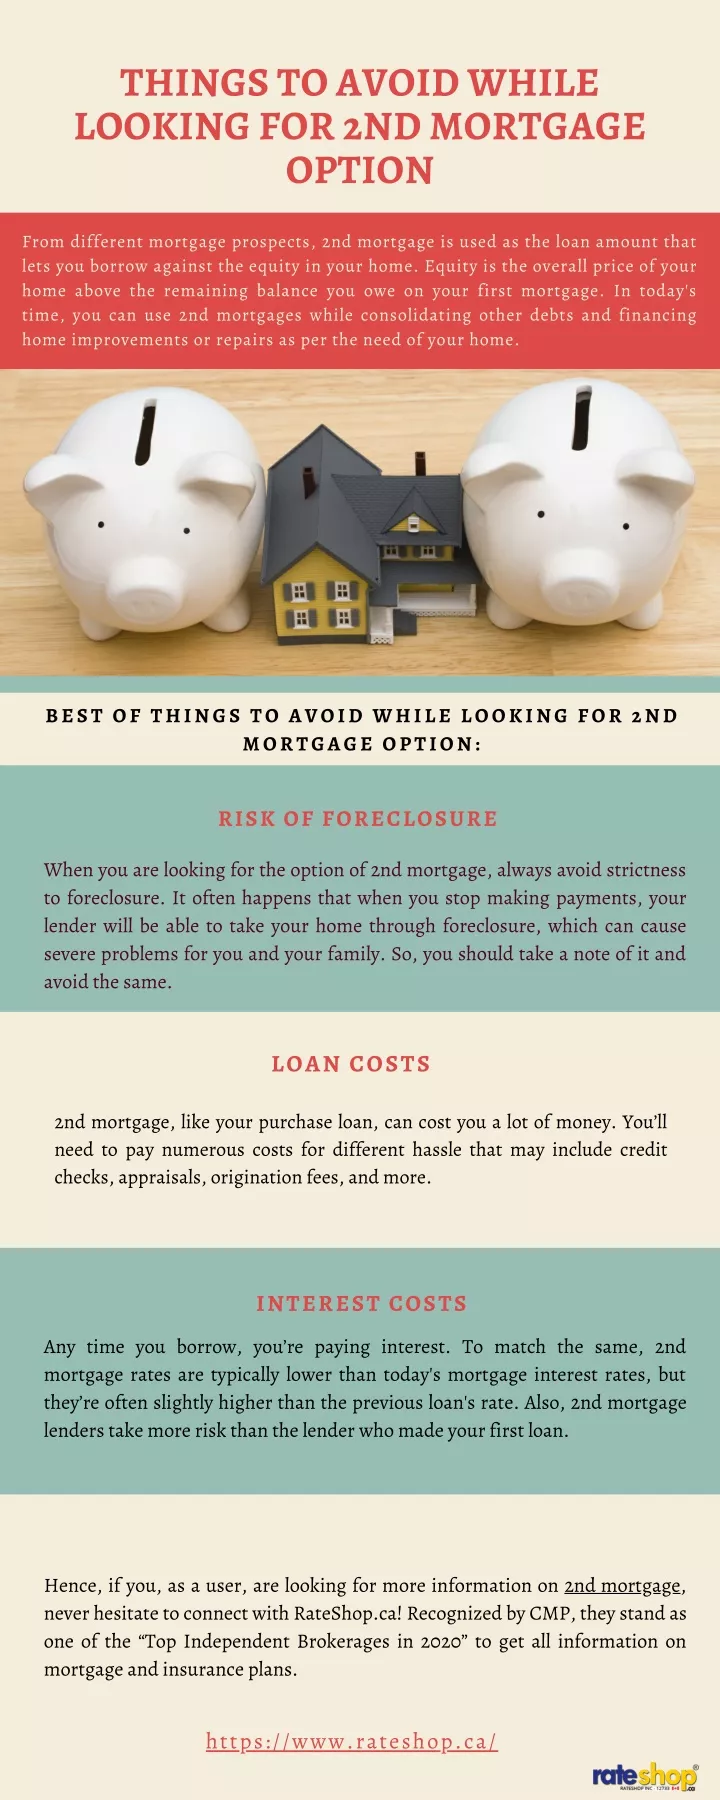 things to avoid while looking for 2nd mortgage